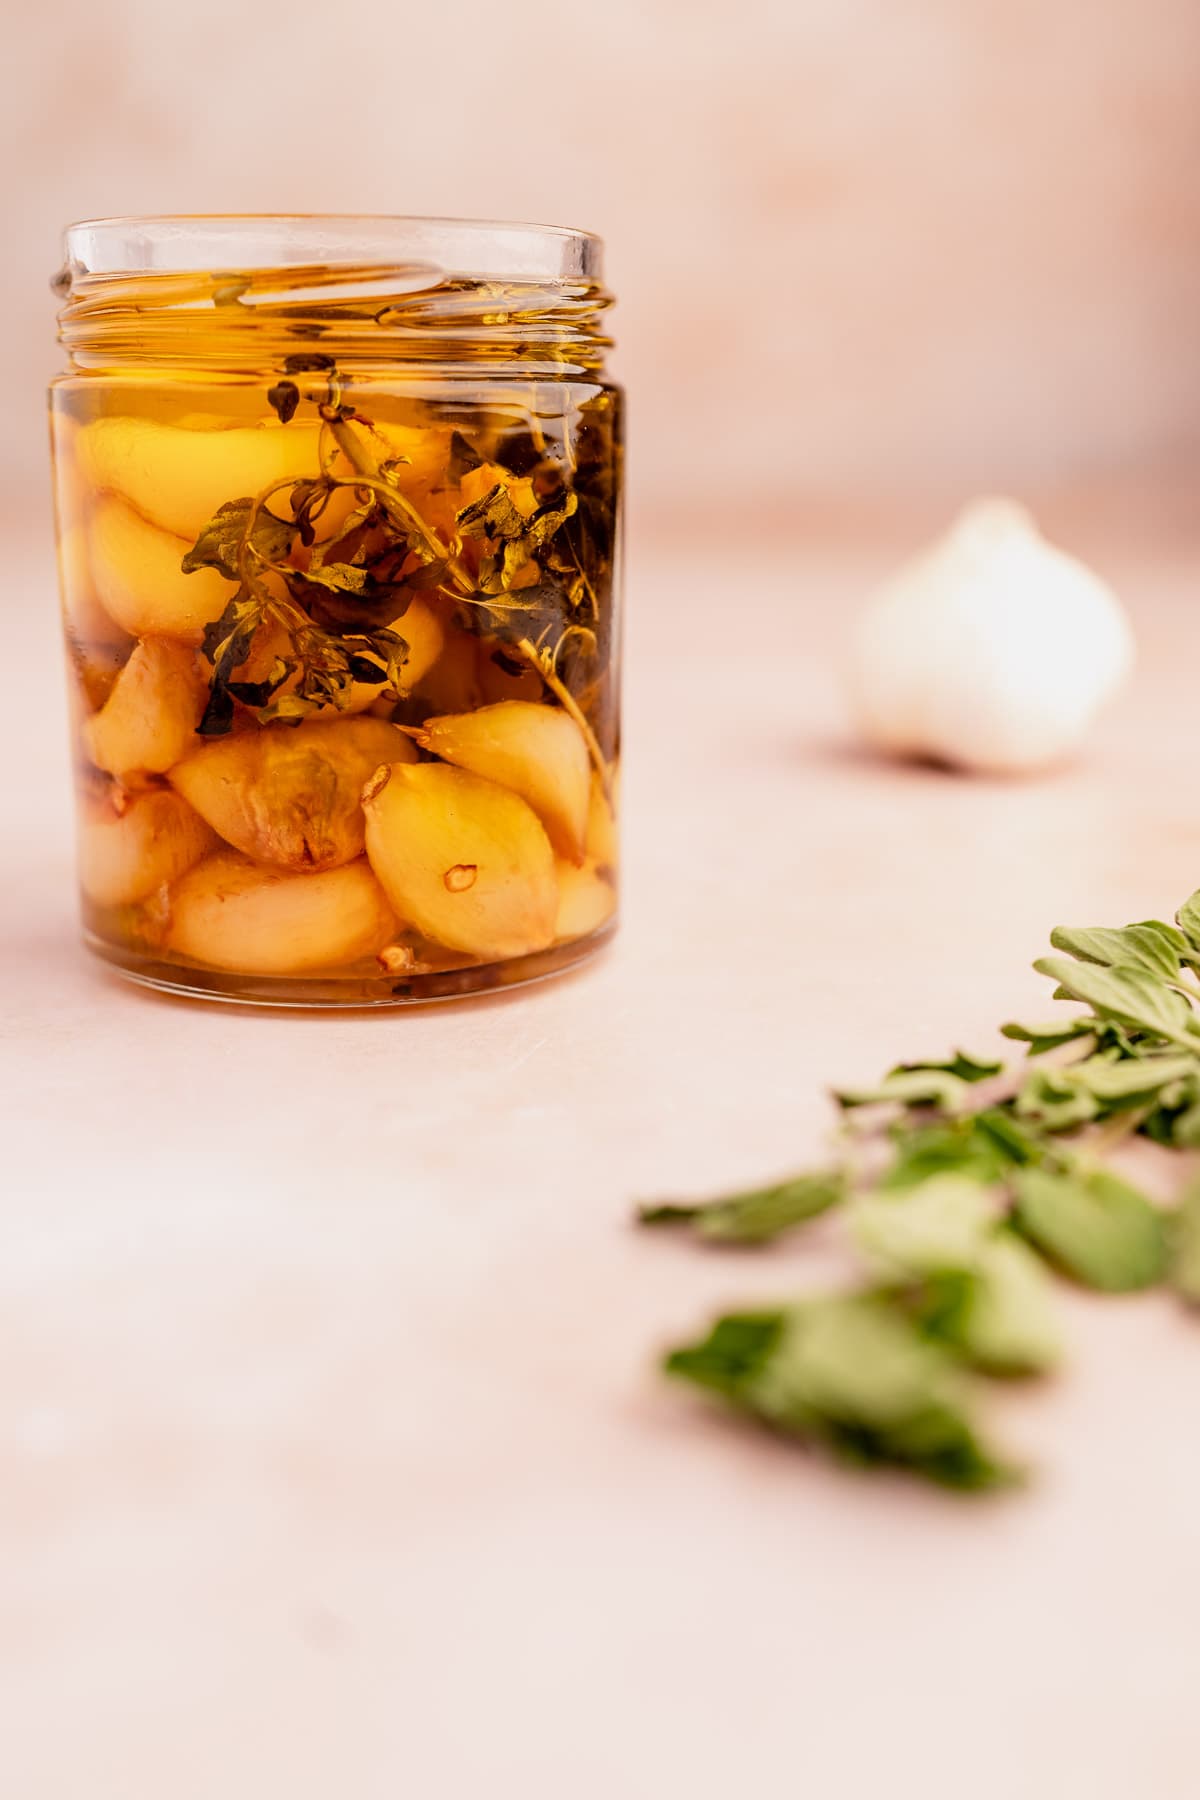 A jar of pickled garlic confit on a table.